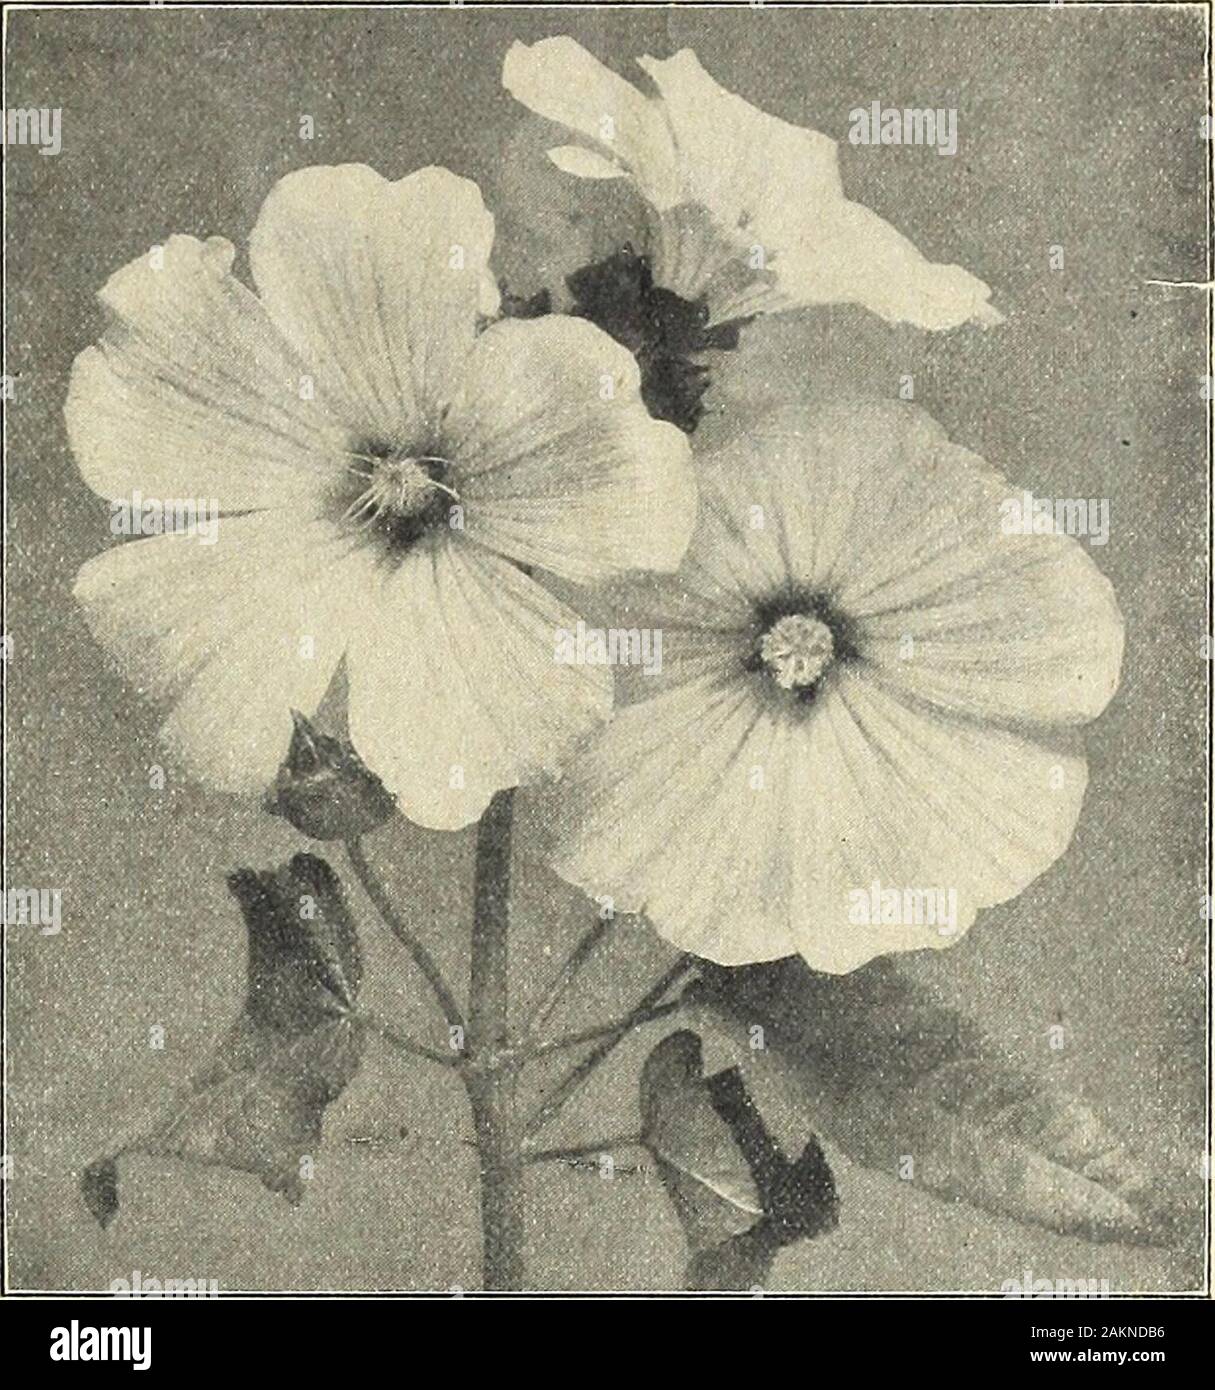 Farquhar's garden annual : 1918 . hey are very desirable.2440 Aborea Variegata. (Tree Mallow.) Excellent for sub-tropical beds. Large ornamental foUage plants with Pkt.leaves profusely mottled yellow and white. 4 feet. 15 59 2445 24462450 24552462 2465 24672470 2475 2480 2485 Rosea SplendenS. Large flowers of brilHant rosy-pink; superb for cutting. 3 ft. ... 5 oz., .40; Alba SplendenS. Large pearly-white flowers; verydecorative. 3 ft. ... ... ...  oz., .40; Trimestris Pink. Useful for planting in masses orfor cut flowers. 3 ft. ... ... Oz., .60; Trimestris White. Oz., .60; LAYIA ELEGANS. A pr Stock Photo